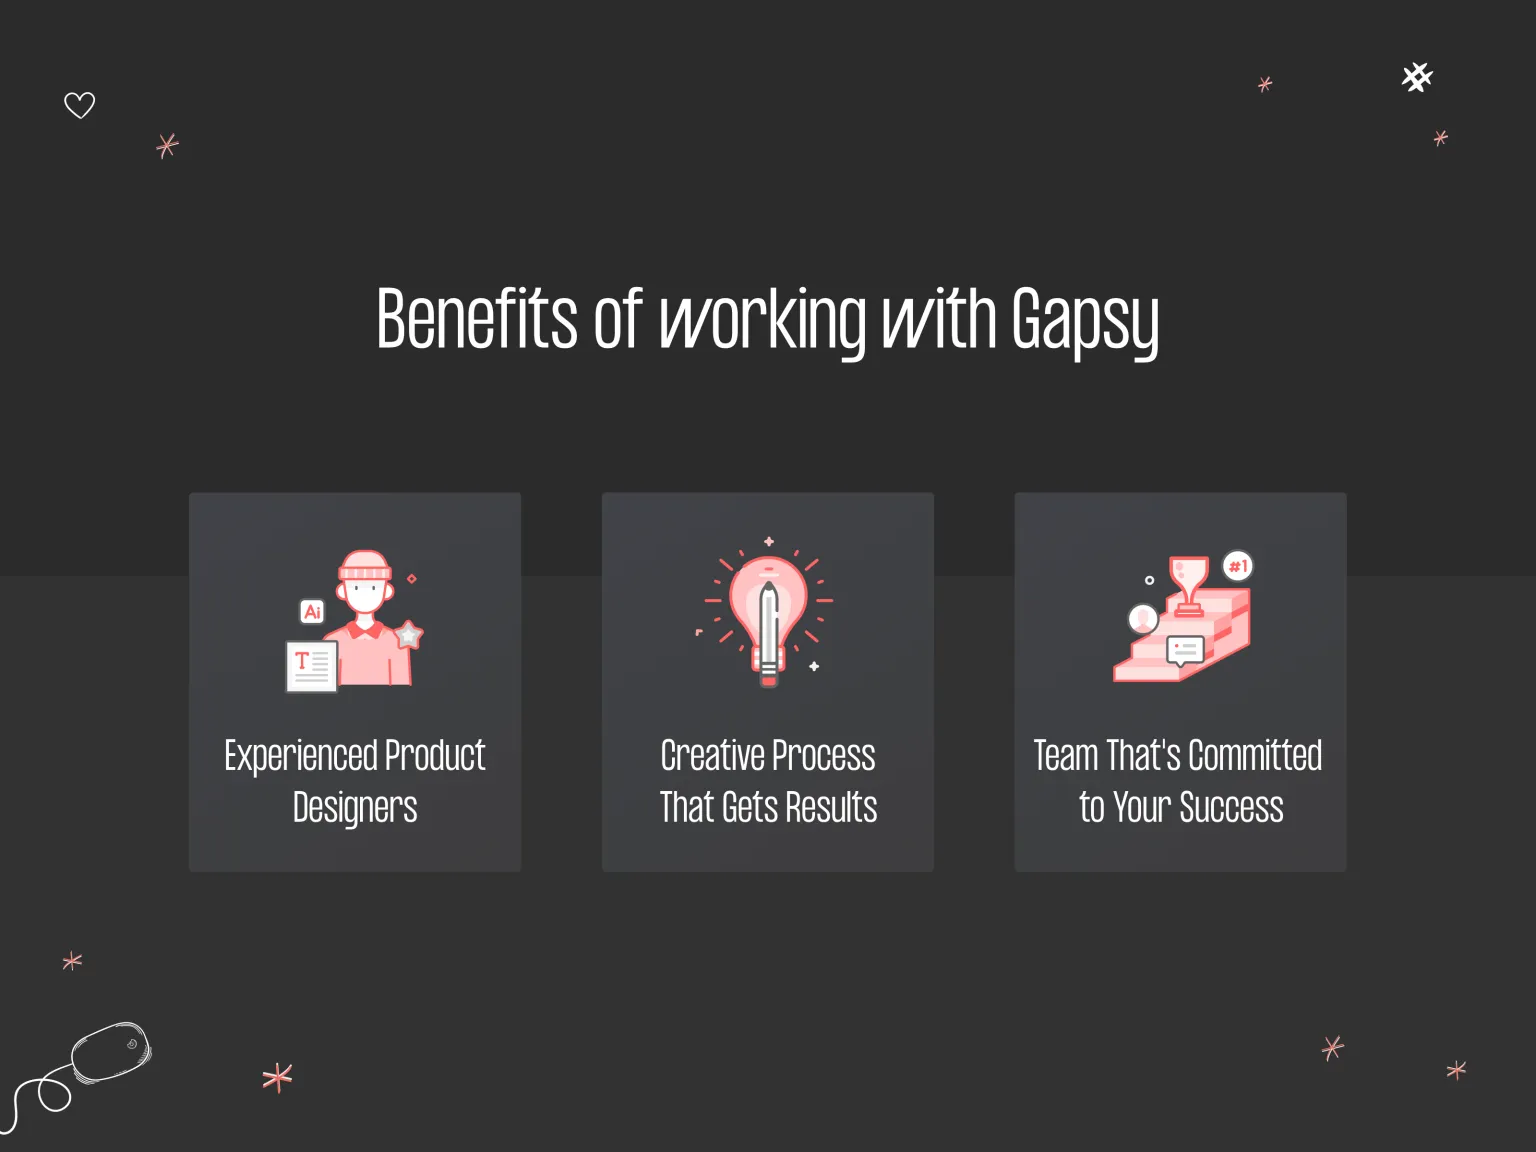 benefits of working with gapsy